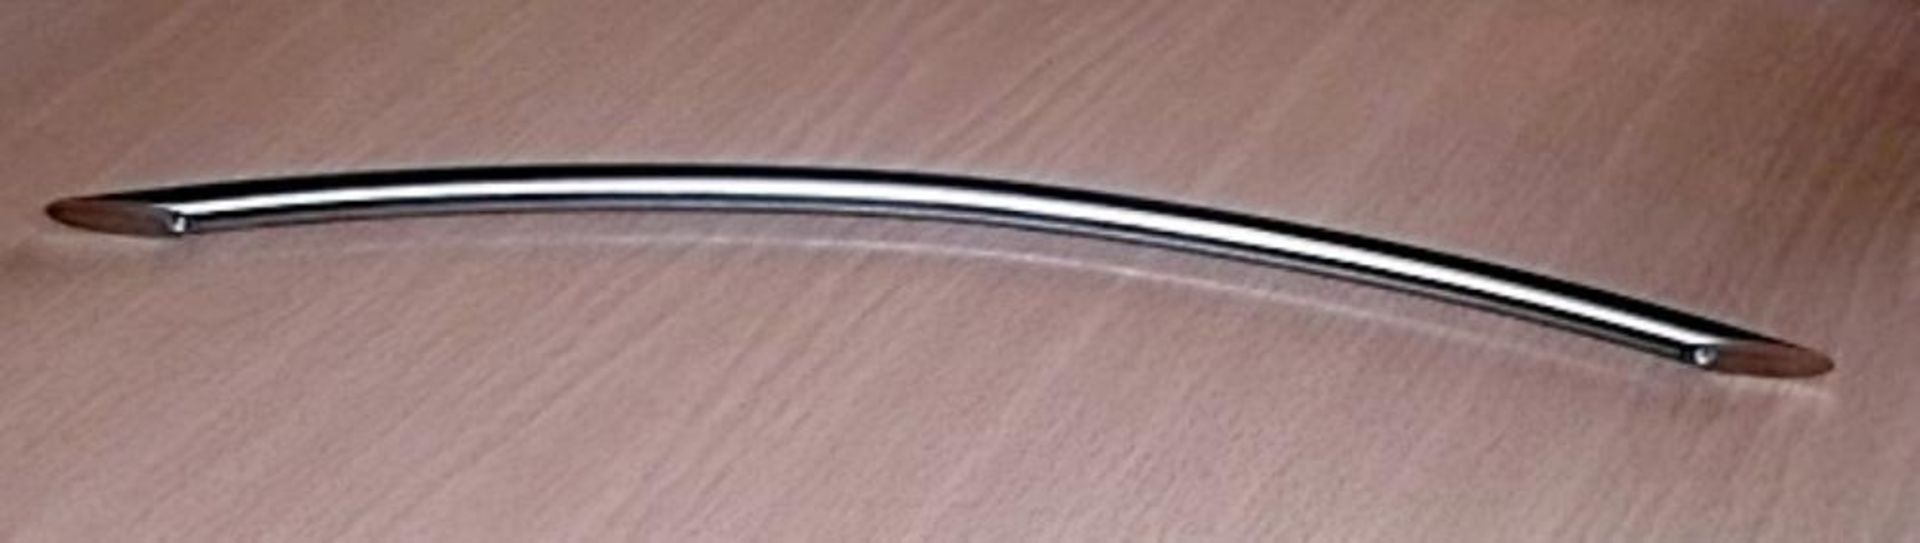 250 x BOW Handle Kitchen Door Handles By Crestwood - 320mm - New Stock - Brushed Nickel Finish - Fix - Image 2 of 10